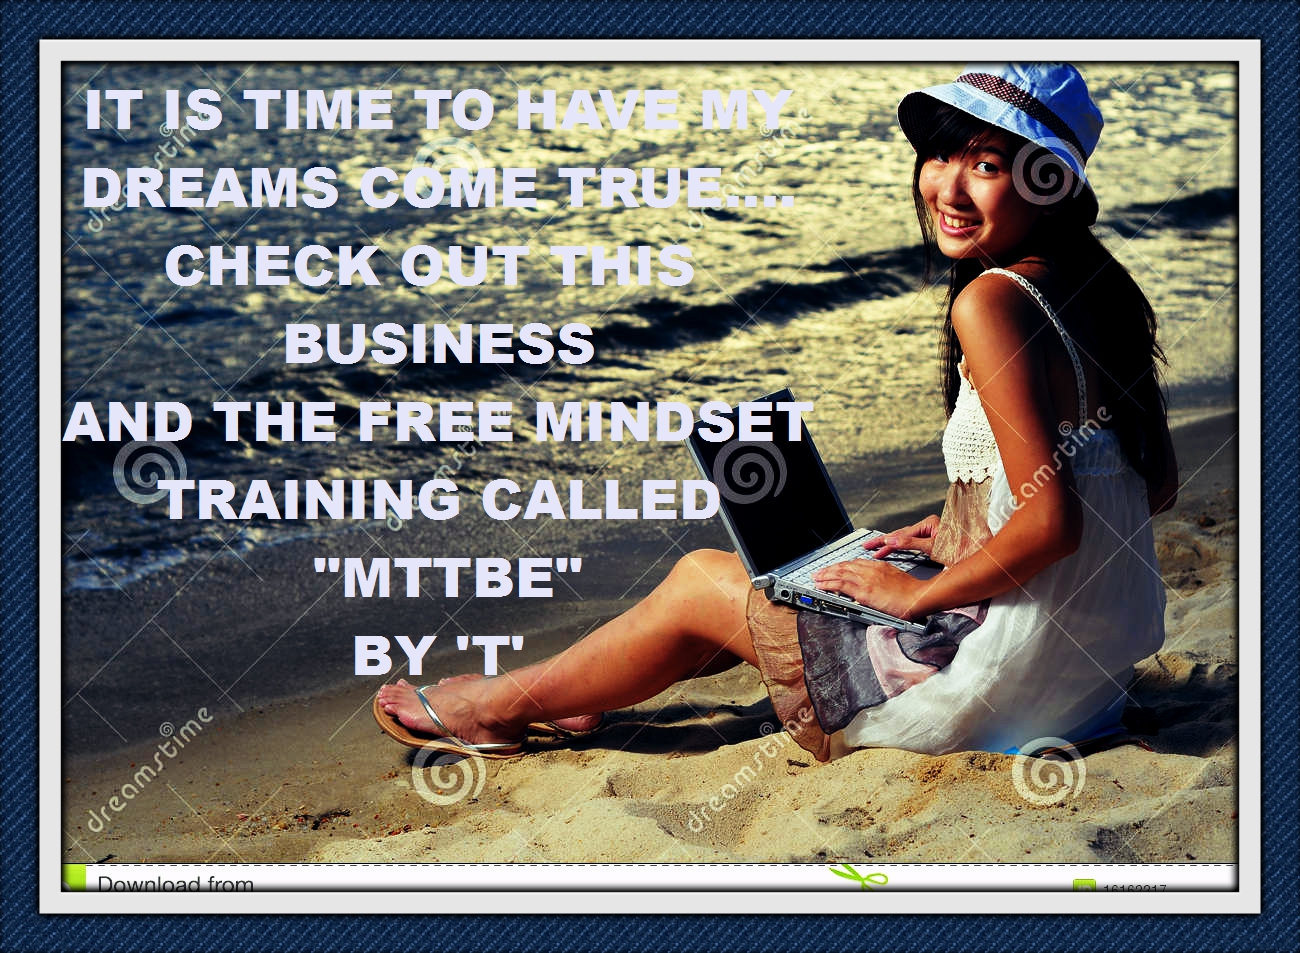 Mindset Can Change Your Life...MTTBE works when you do it. Ask about it?